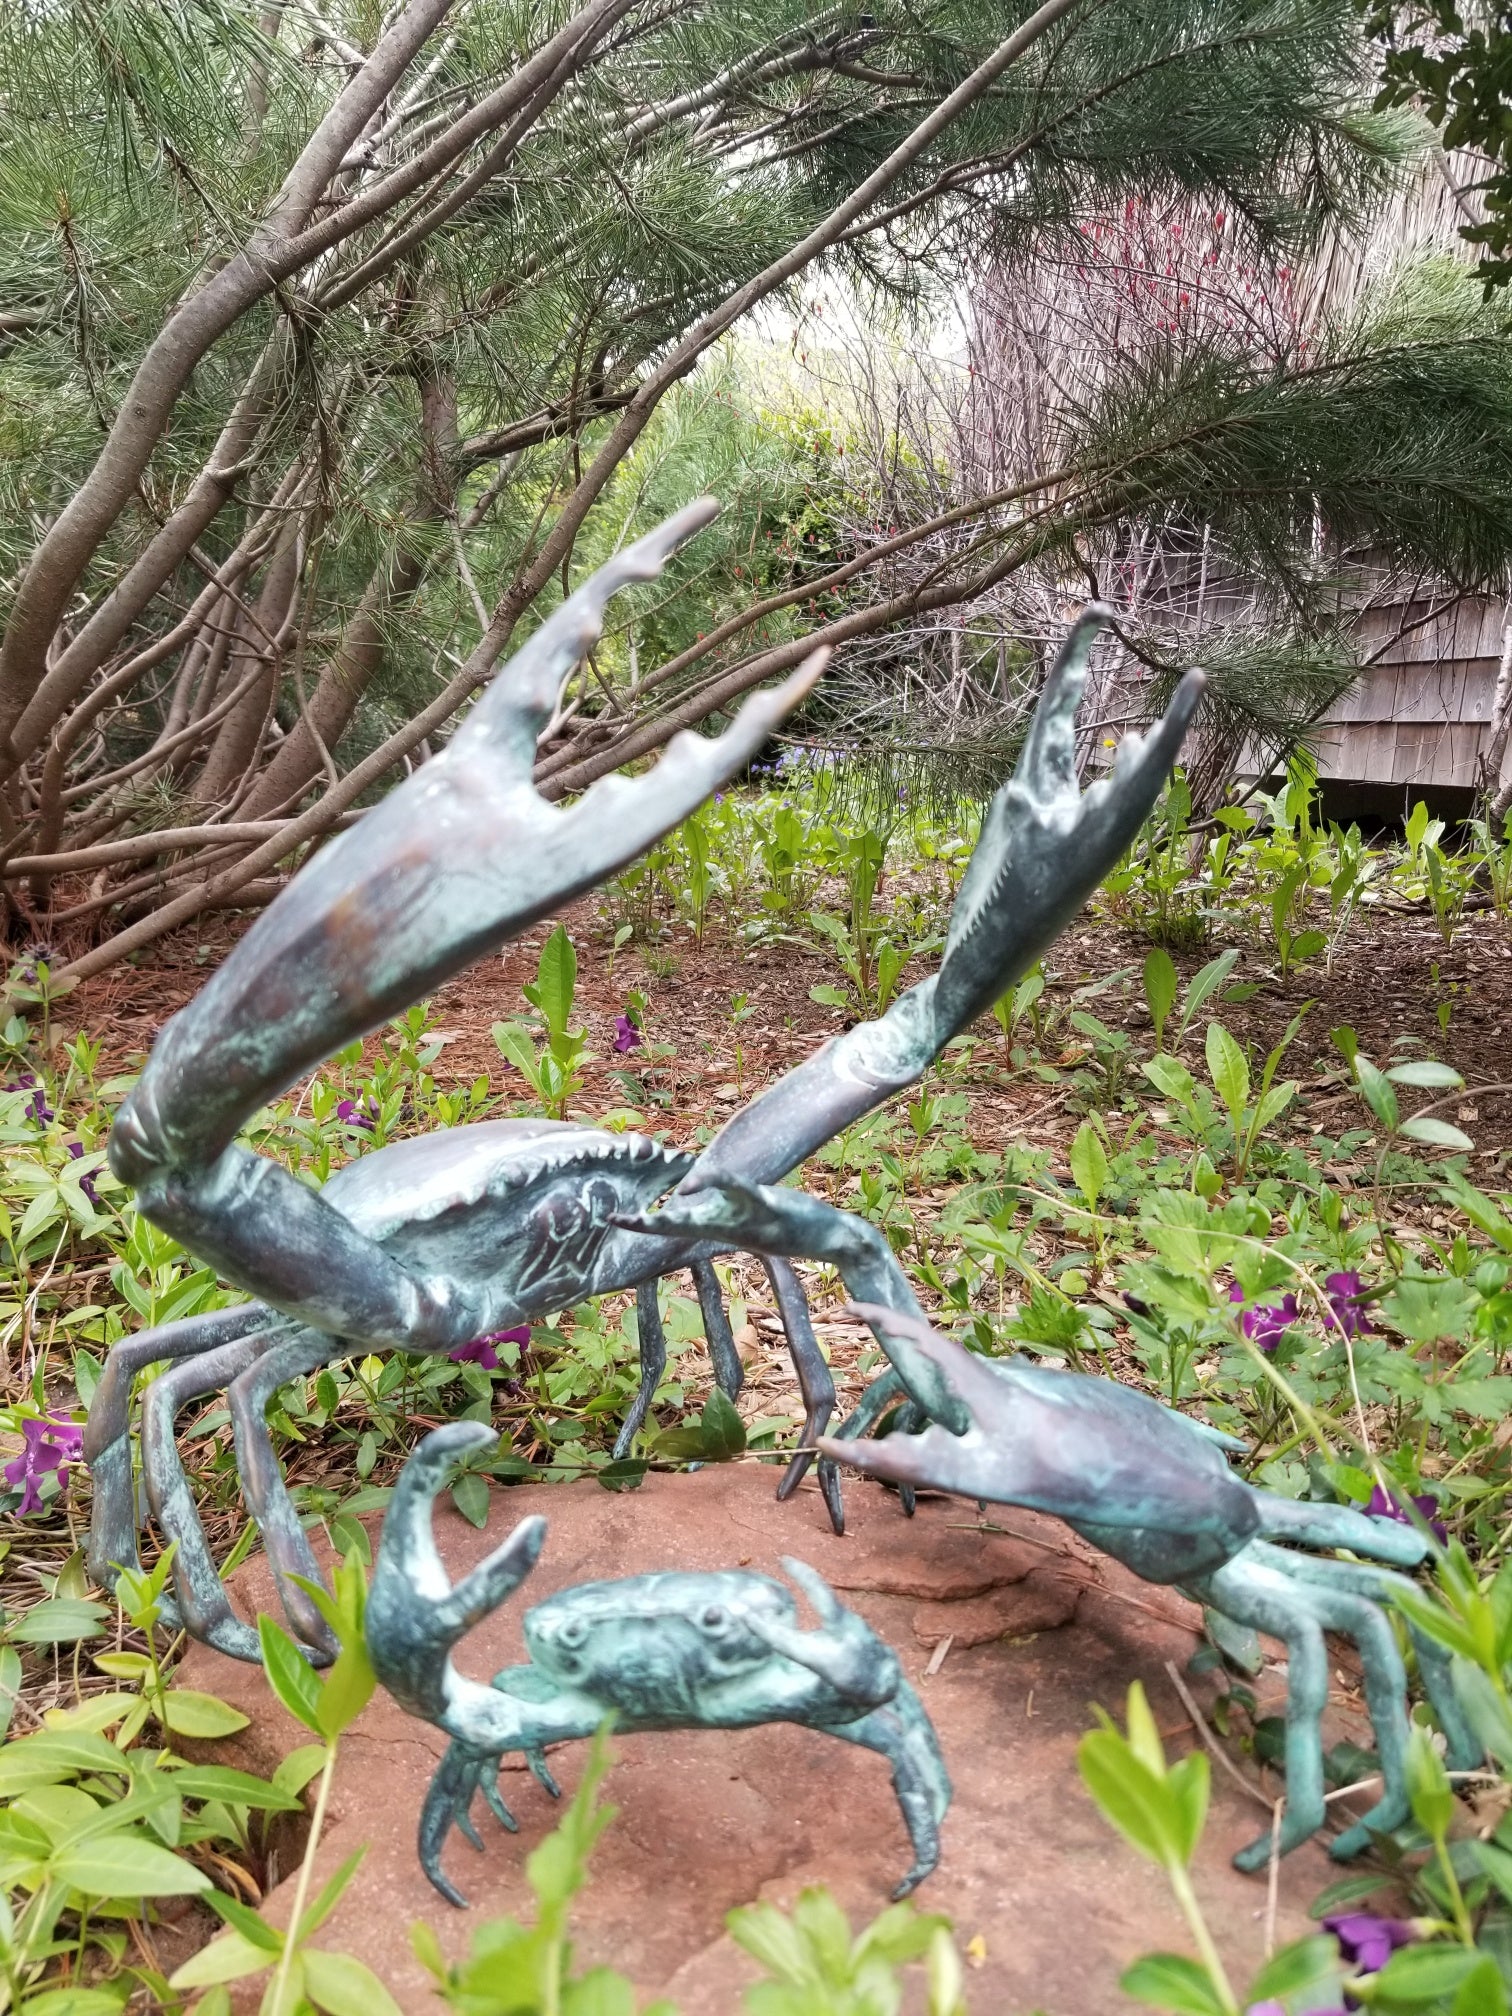 crab statue collection in bronze for sale